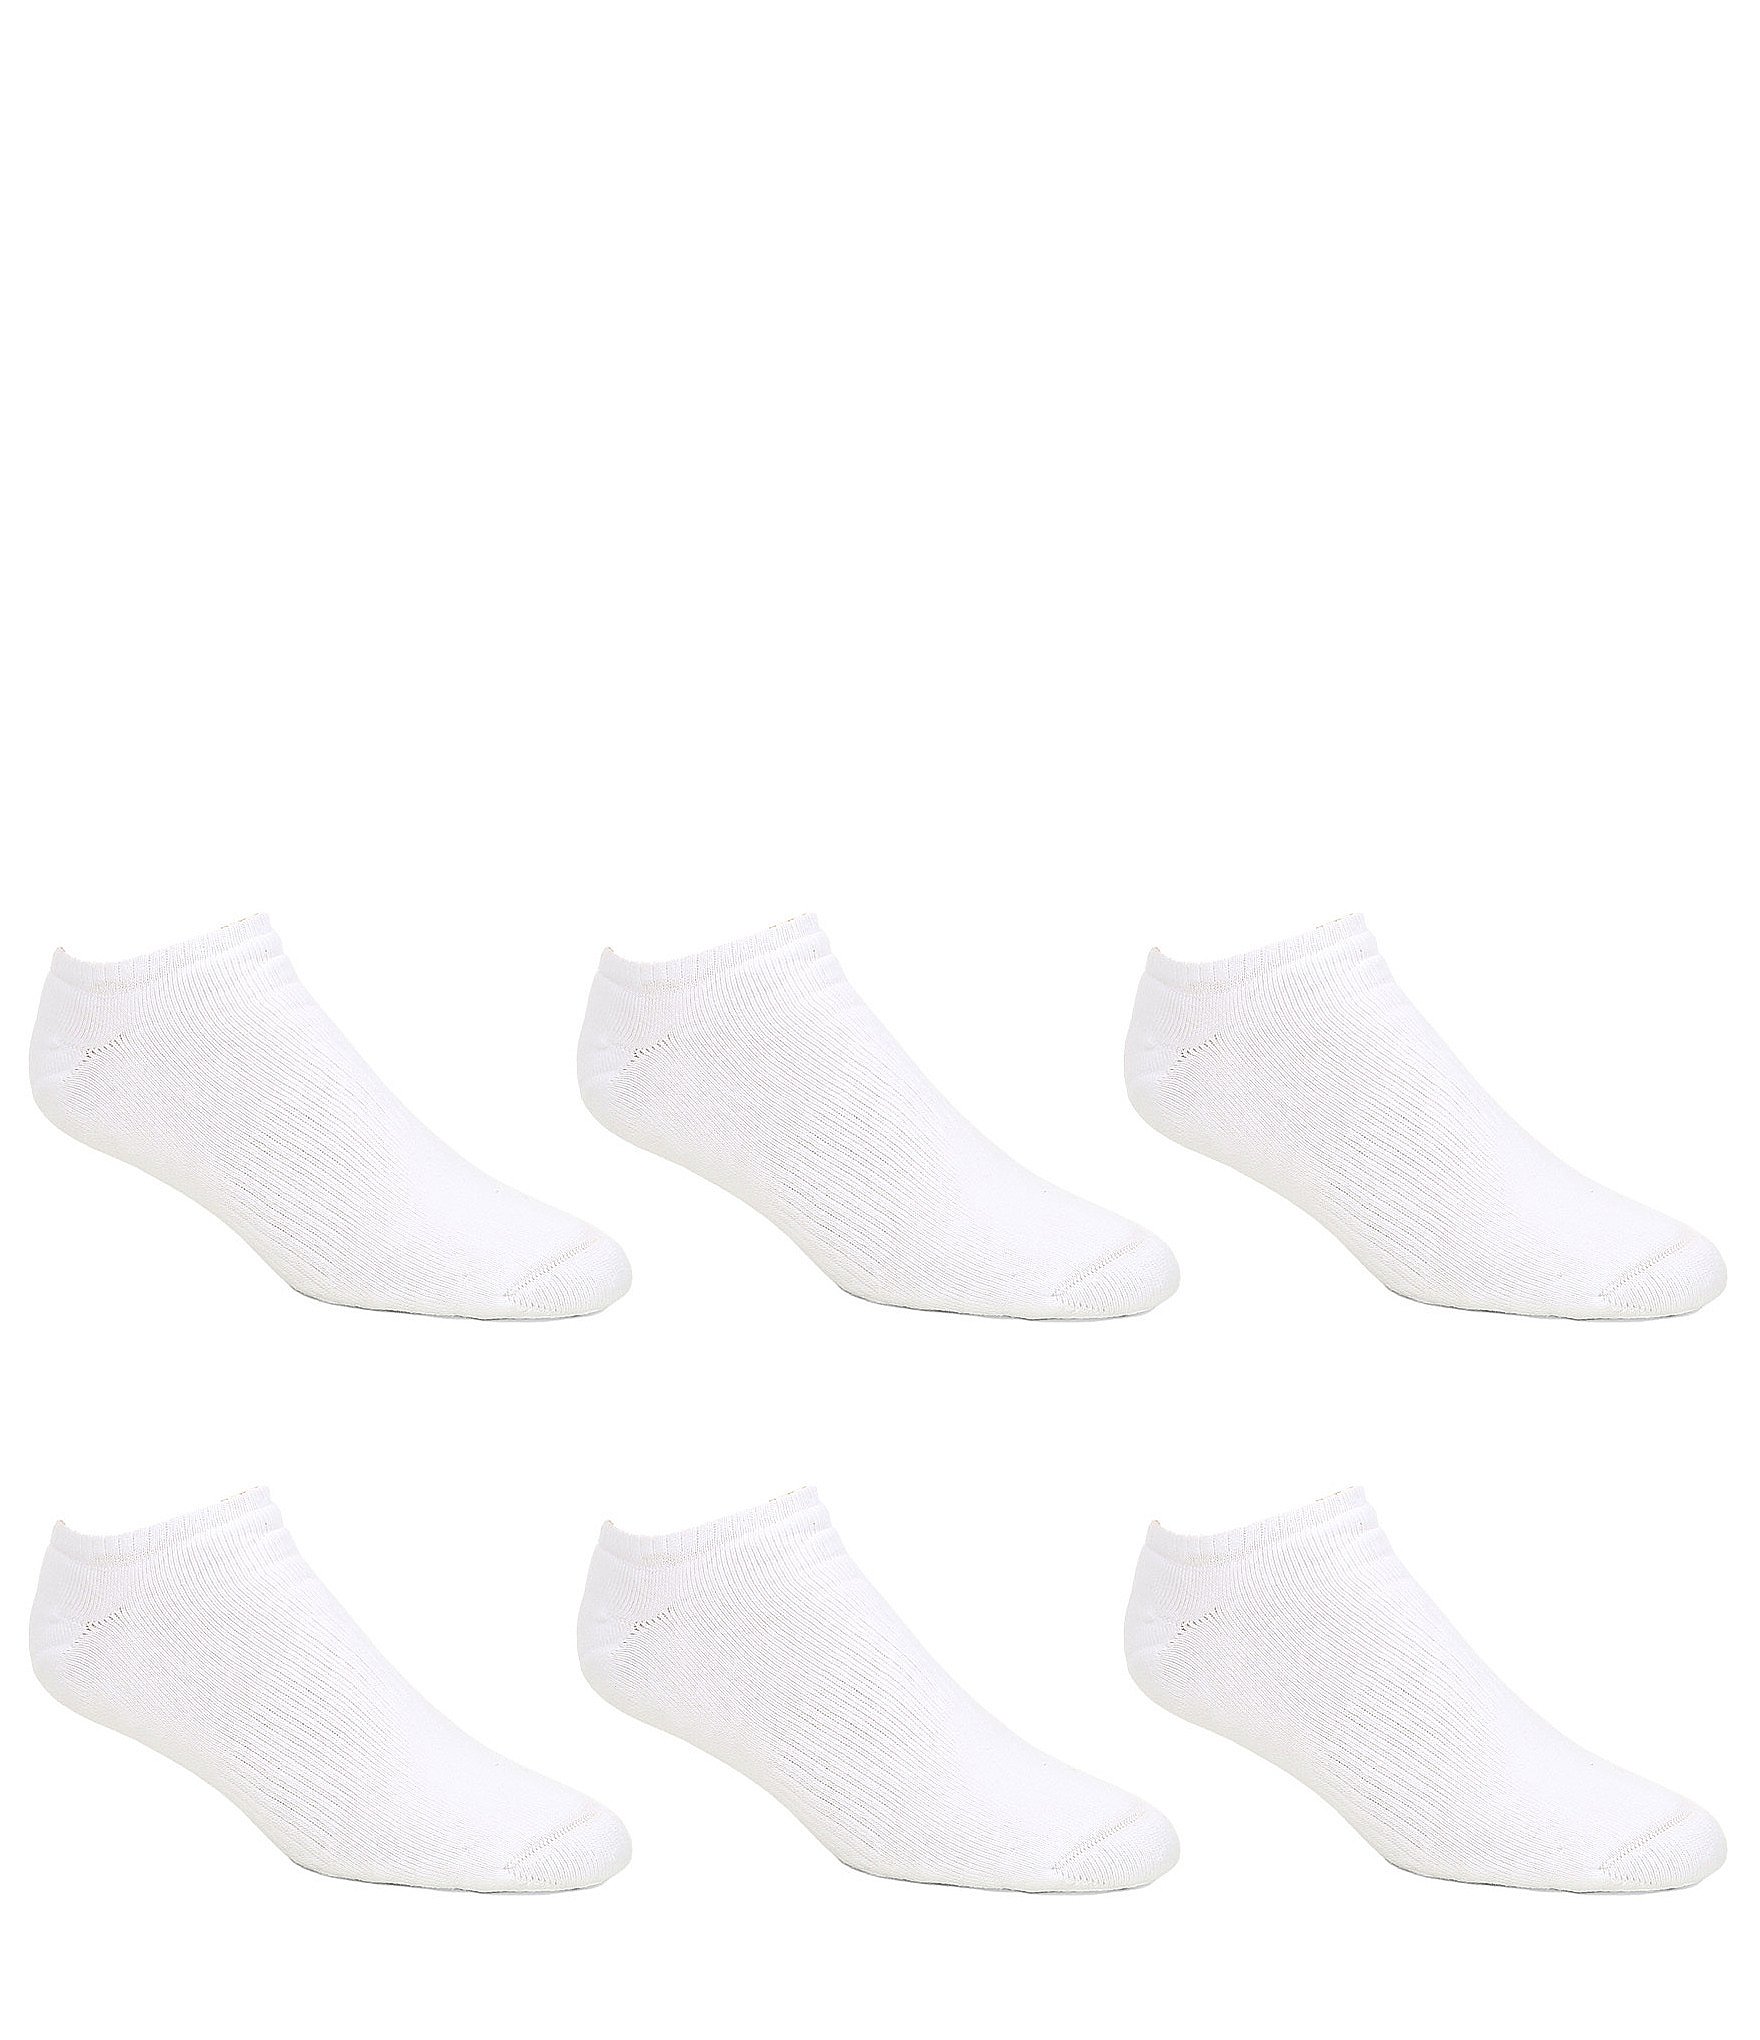 Gold Label Roundtree & Yorke No-Show Athletic Socks 6-Pack | Dillard's